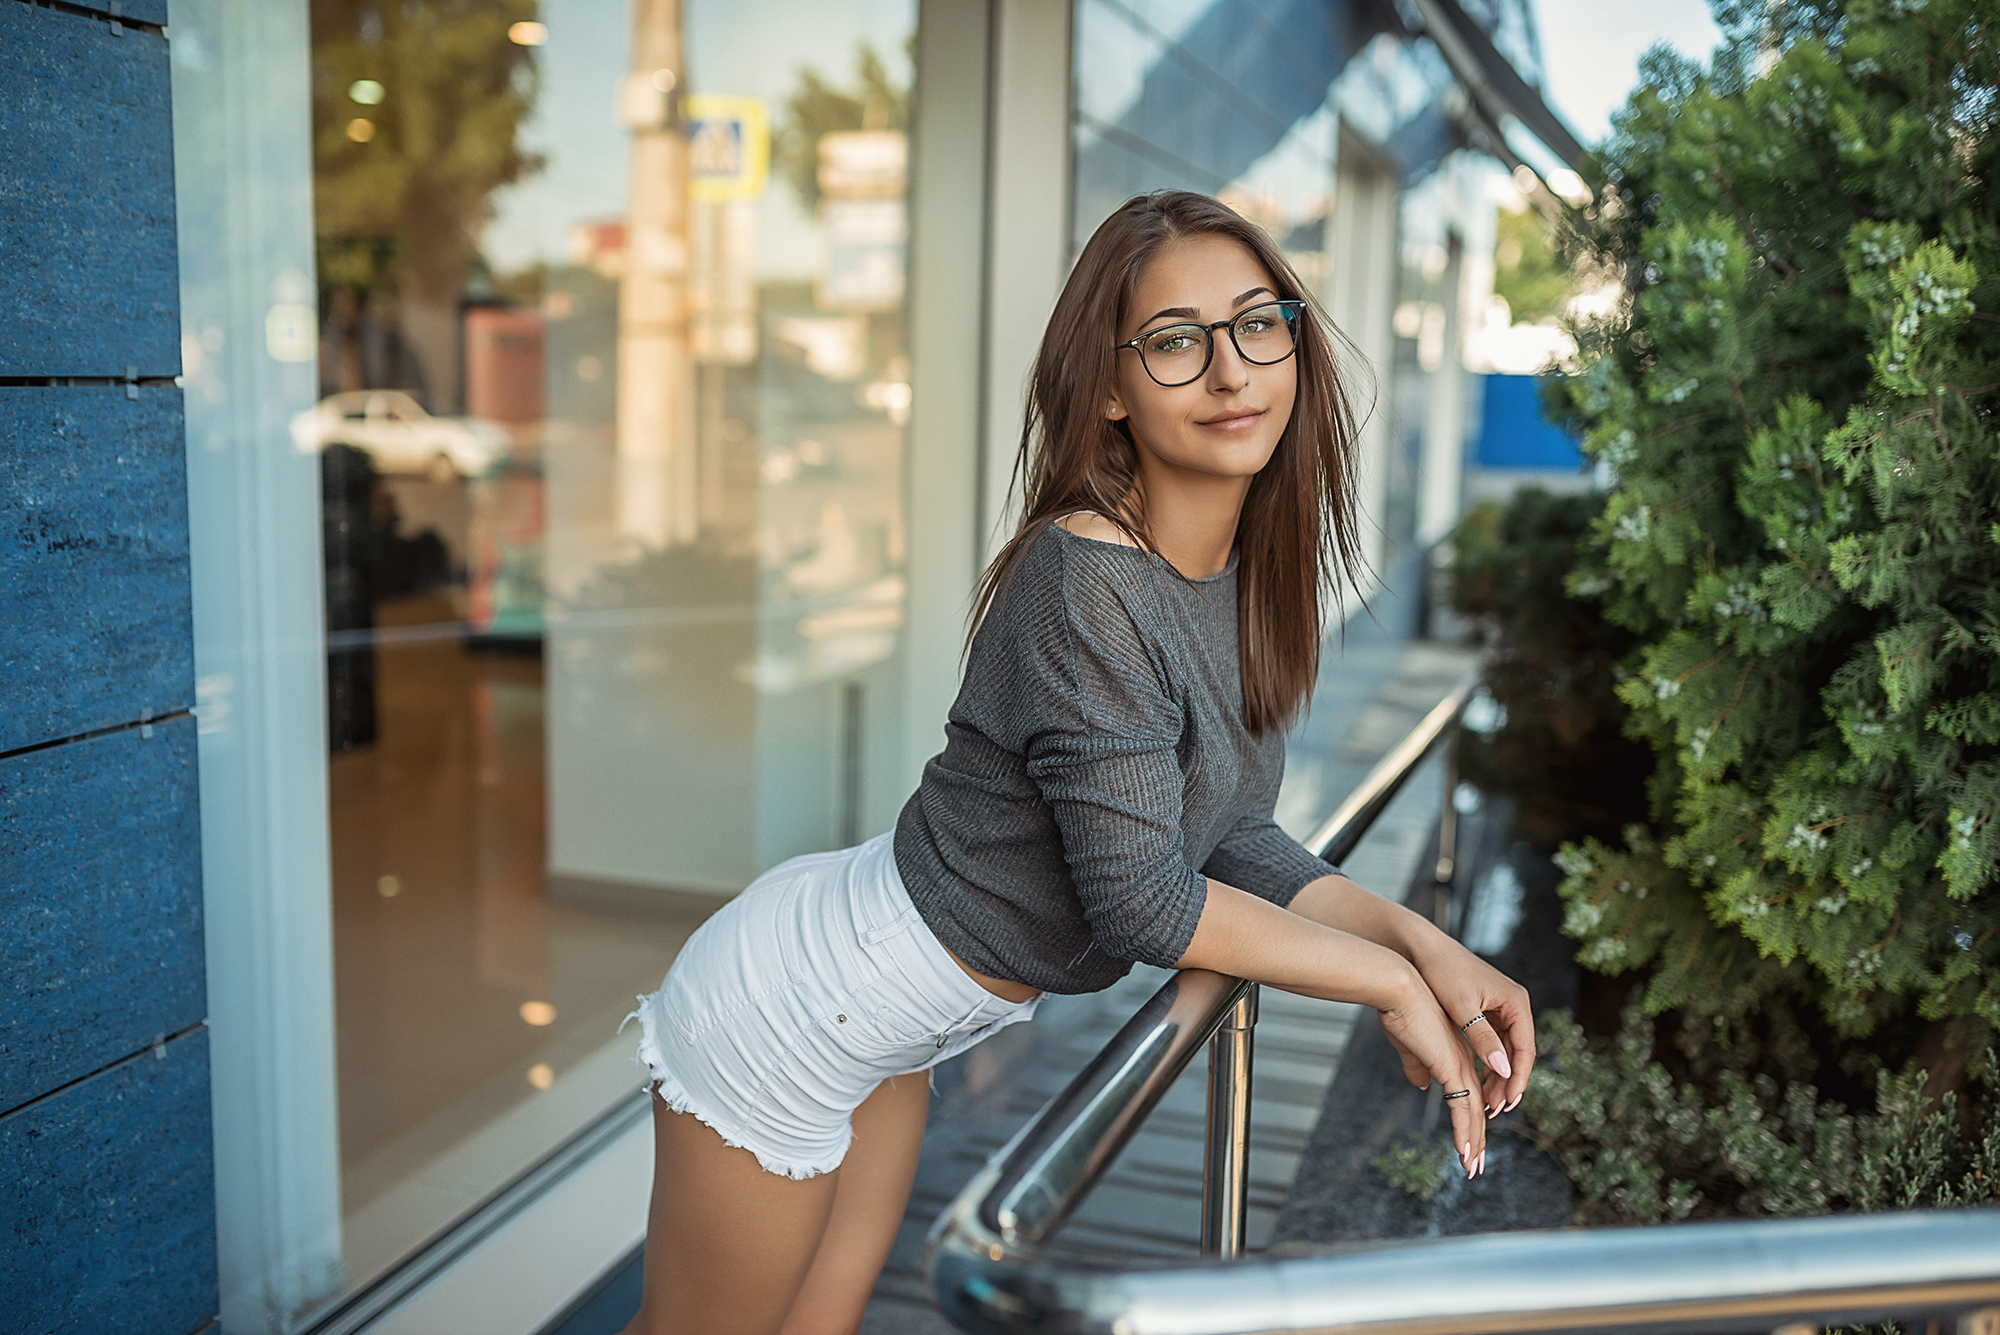 People 2000x1335 women tanned jean shorts women with glasses women outdoors portrait smiling glass depth of field glasses petite skinny high waisted shorts